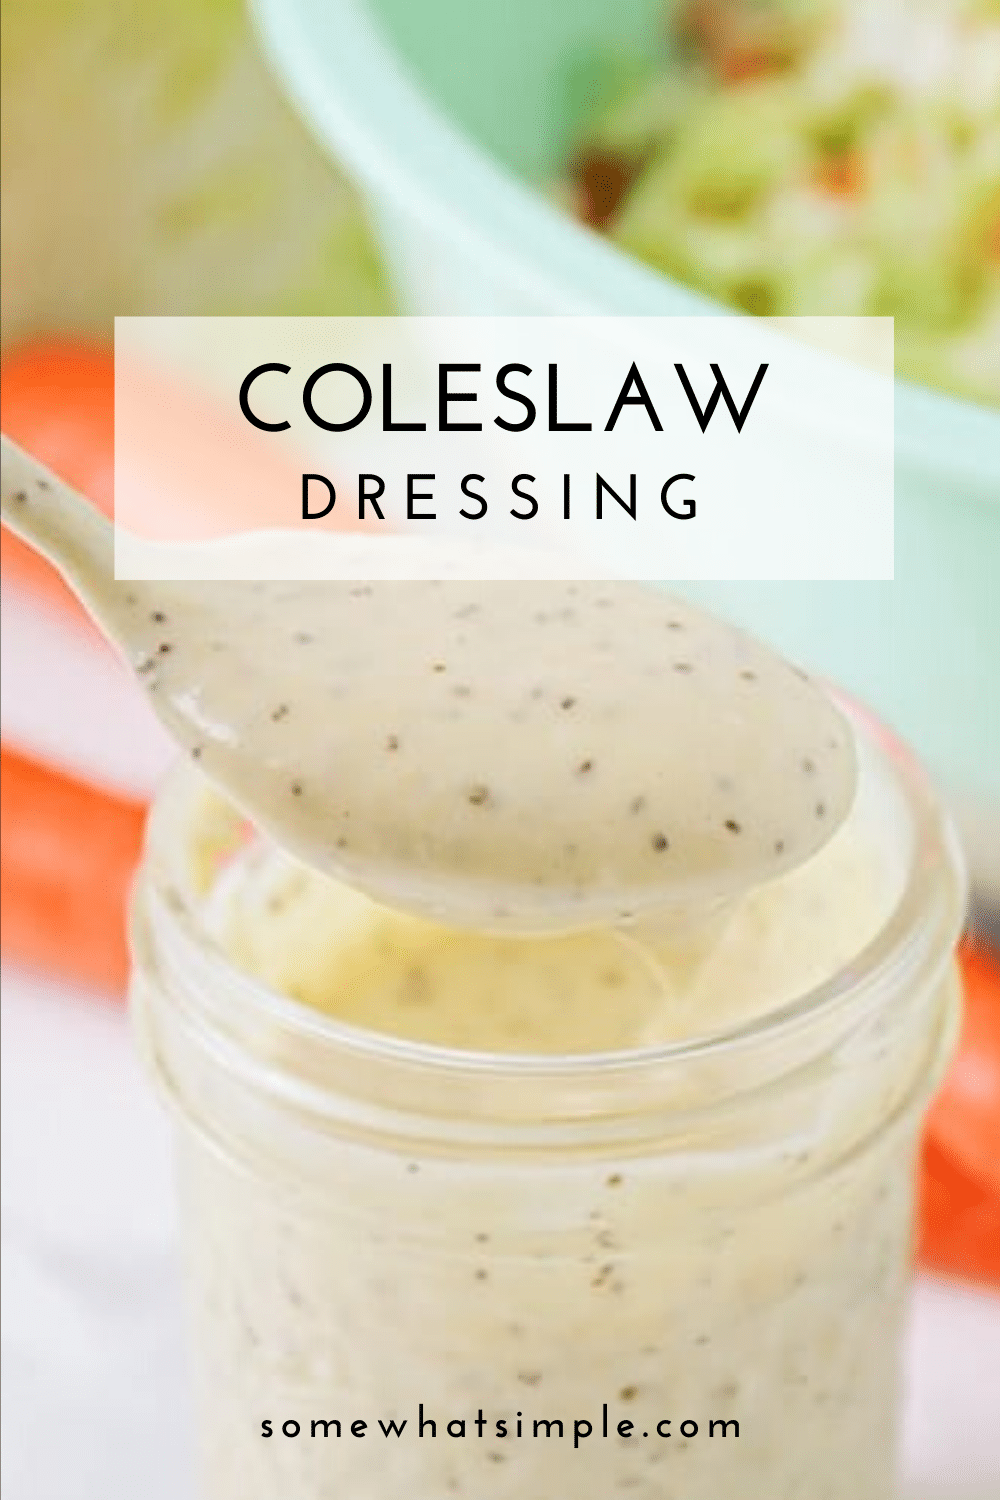 This flavorful coleslaw dressing will take your homemade coleslaw to the next level! Made with just a few easy ingredients, it's easy to put together and it tastes AMAZING! The best part is that this recipe only takes 3 minutes to make and will taste better than anything you've ever tried. via @somewhatsimple